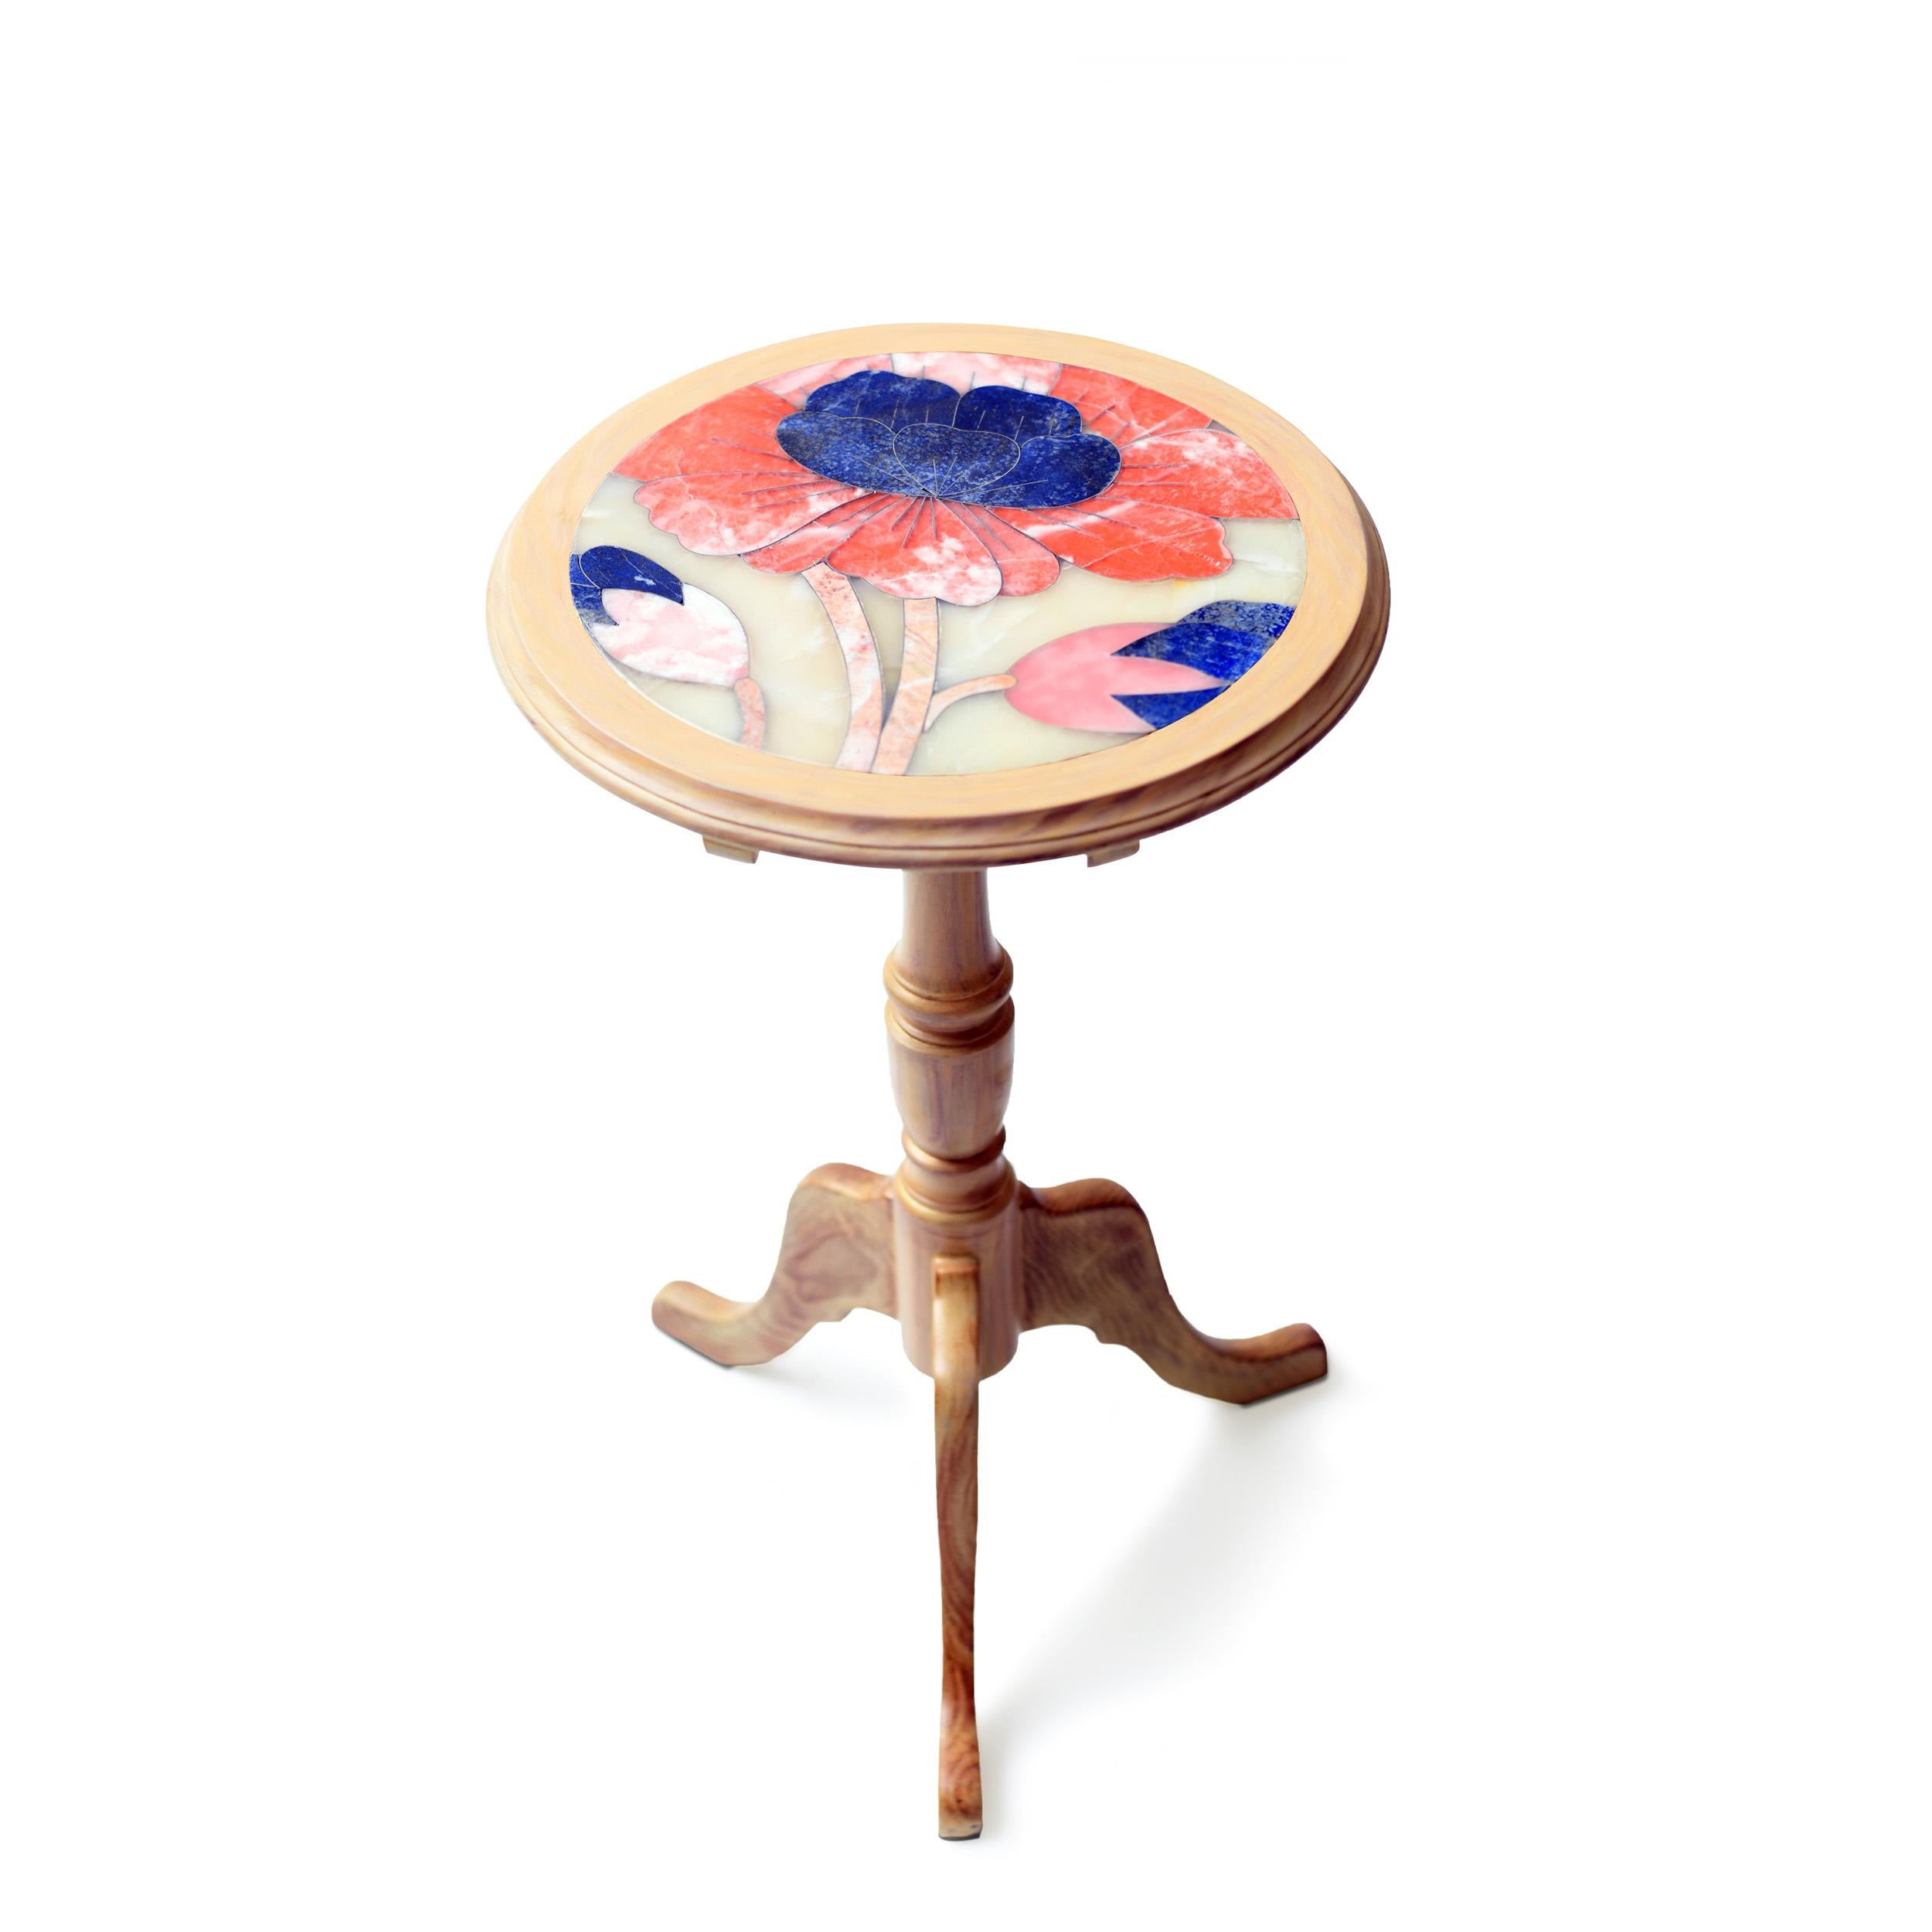 Puvvi tilt-top pink side table by Studio Lel
Dimensions: D46 x W46 x H66 cm
Materials:Lapis lazuli, onyx, marble, wood.

From the Urdu word for the chrysanthemum flower, our Vogue-featuring Puvvi collection is a lively celebration of femininity.